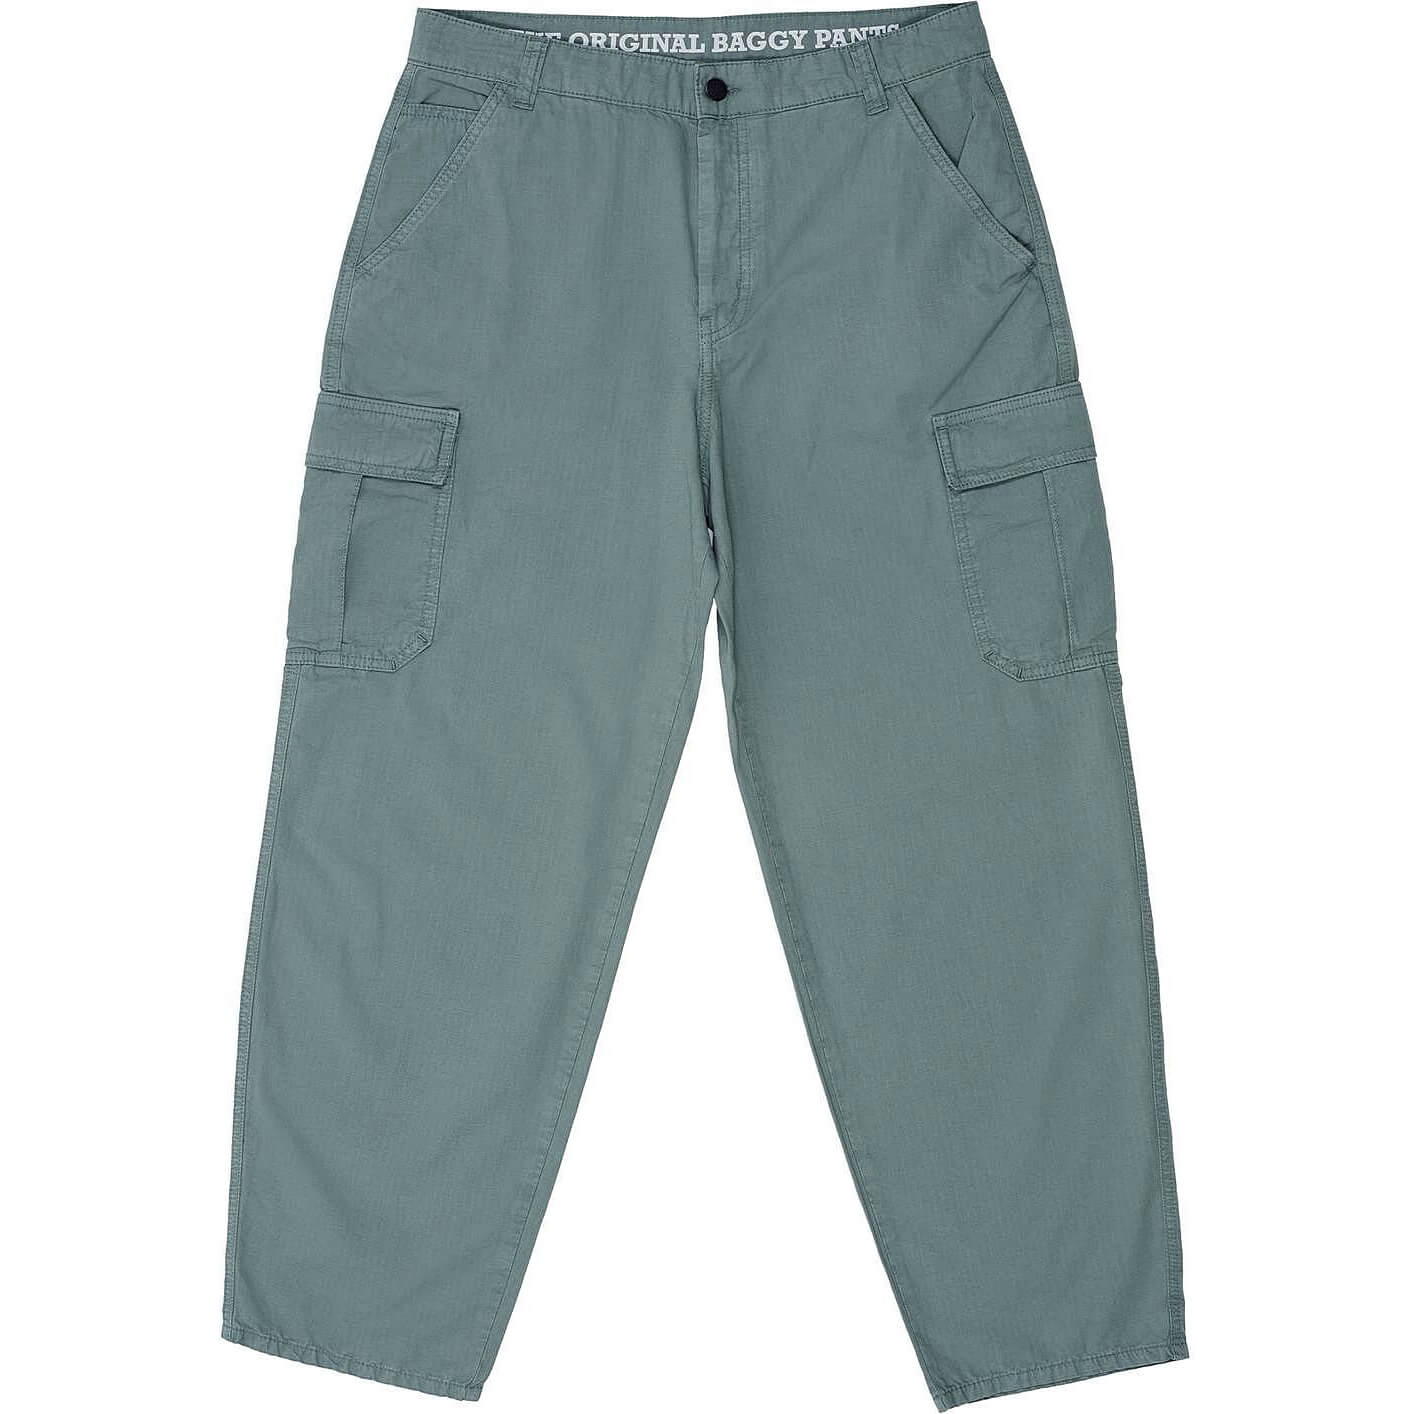 Homeboy x-tra CARGO PANTS OLIVE